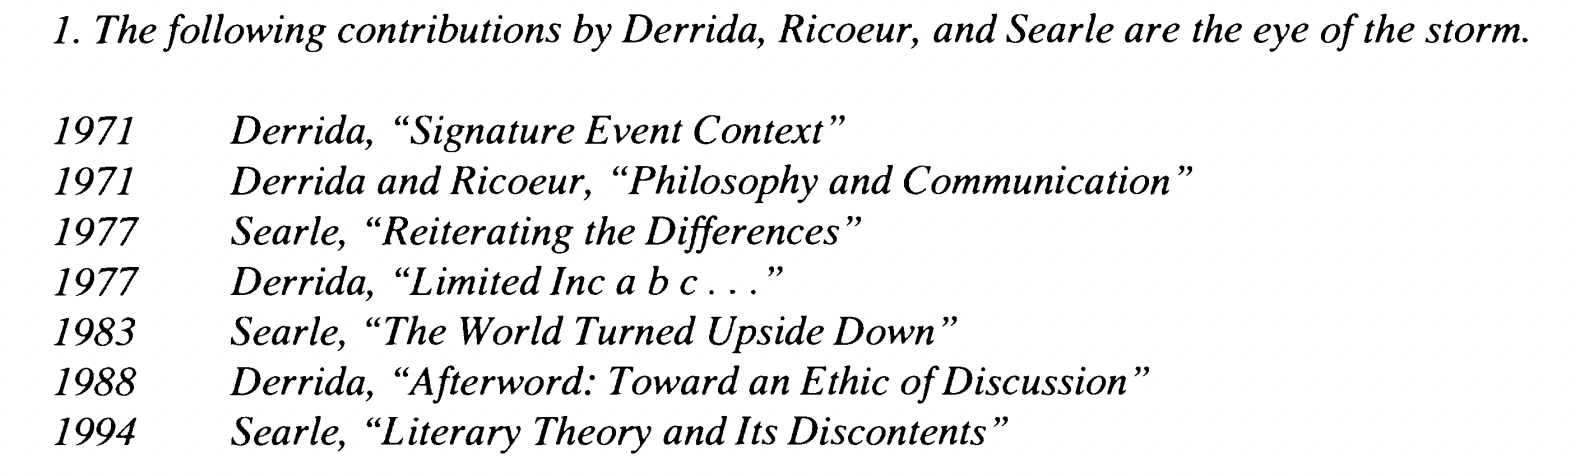 Timeline of Derrida and Searle's argument, from 1971 to 1994